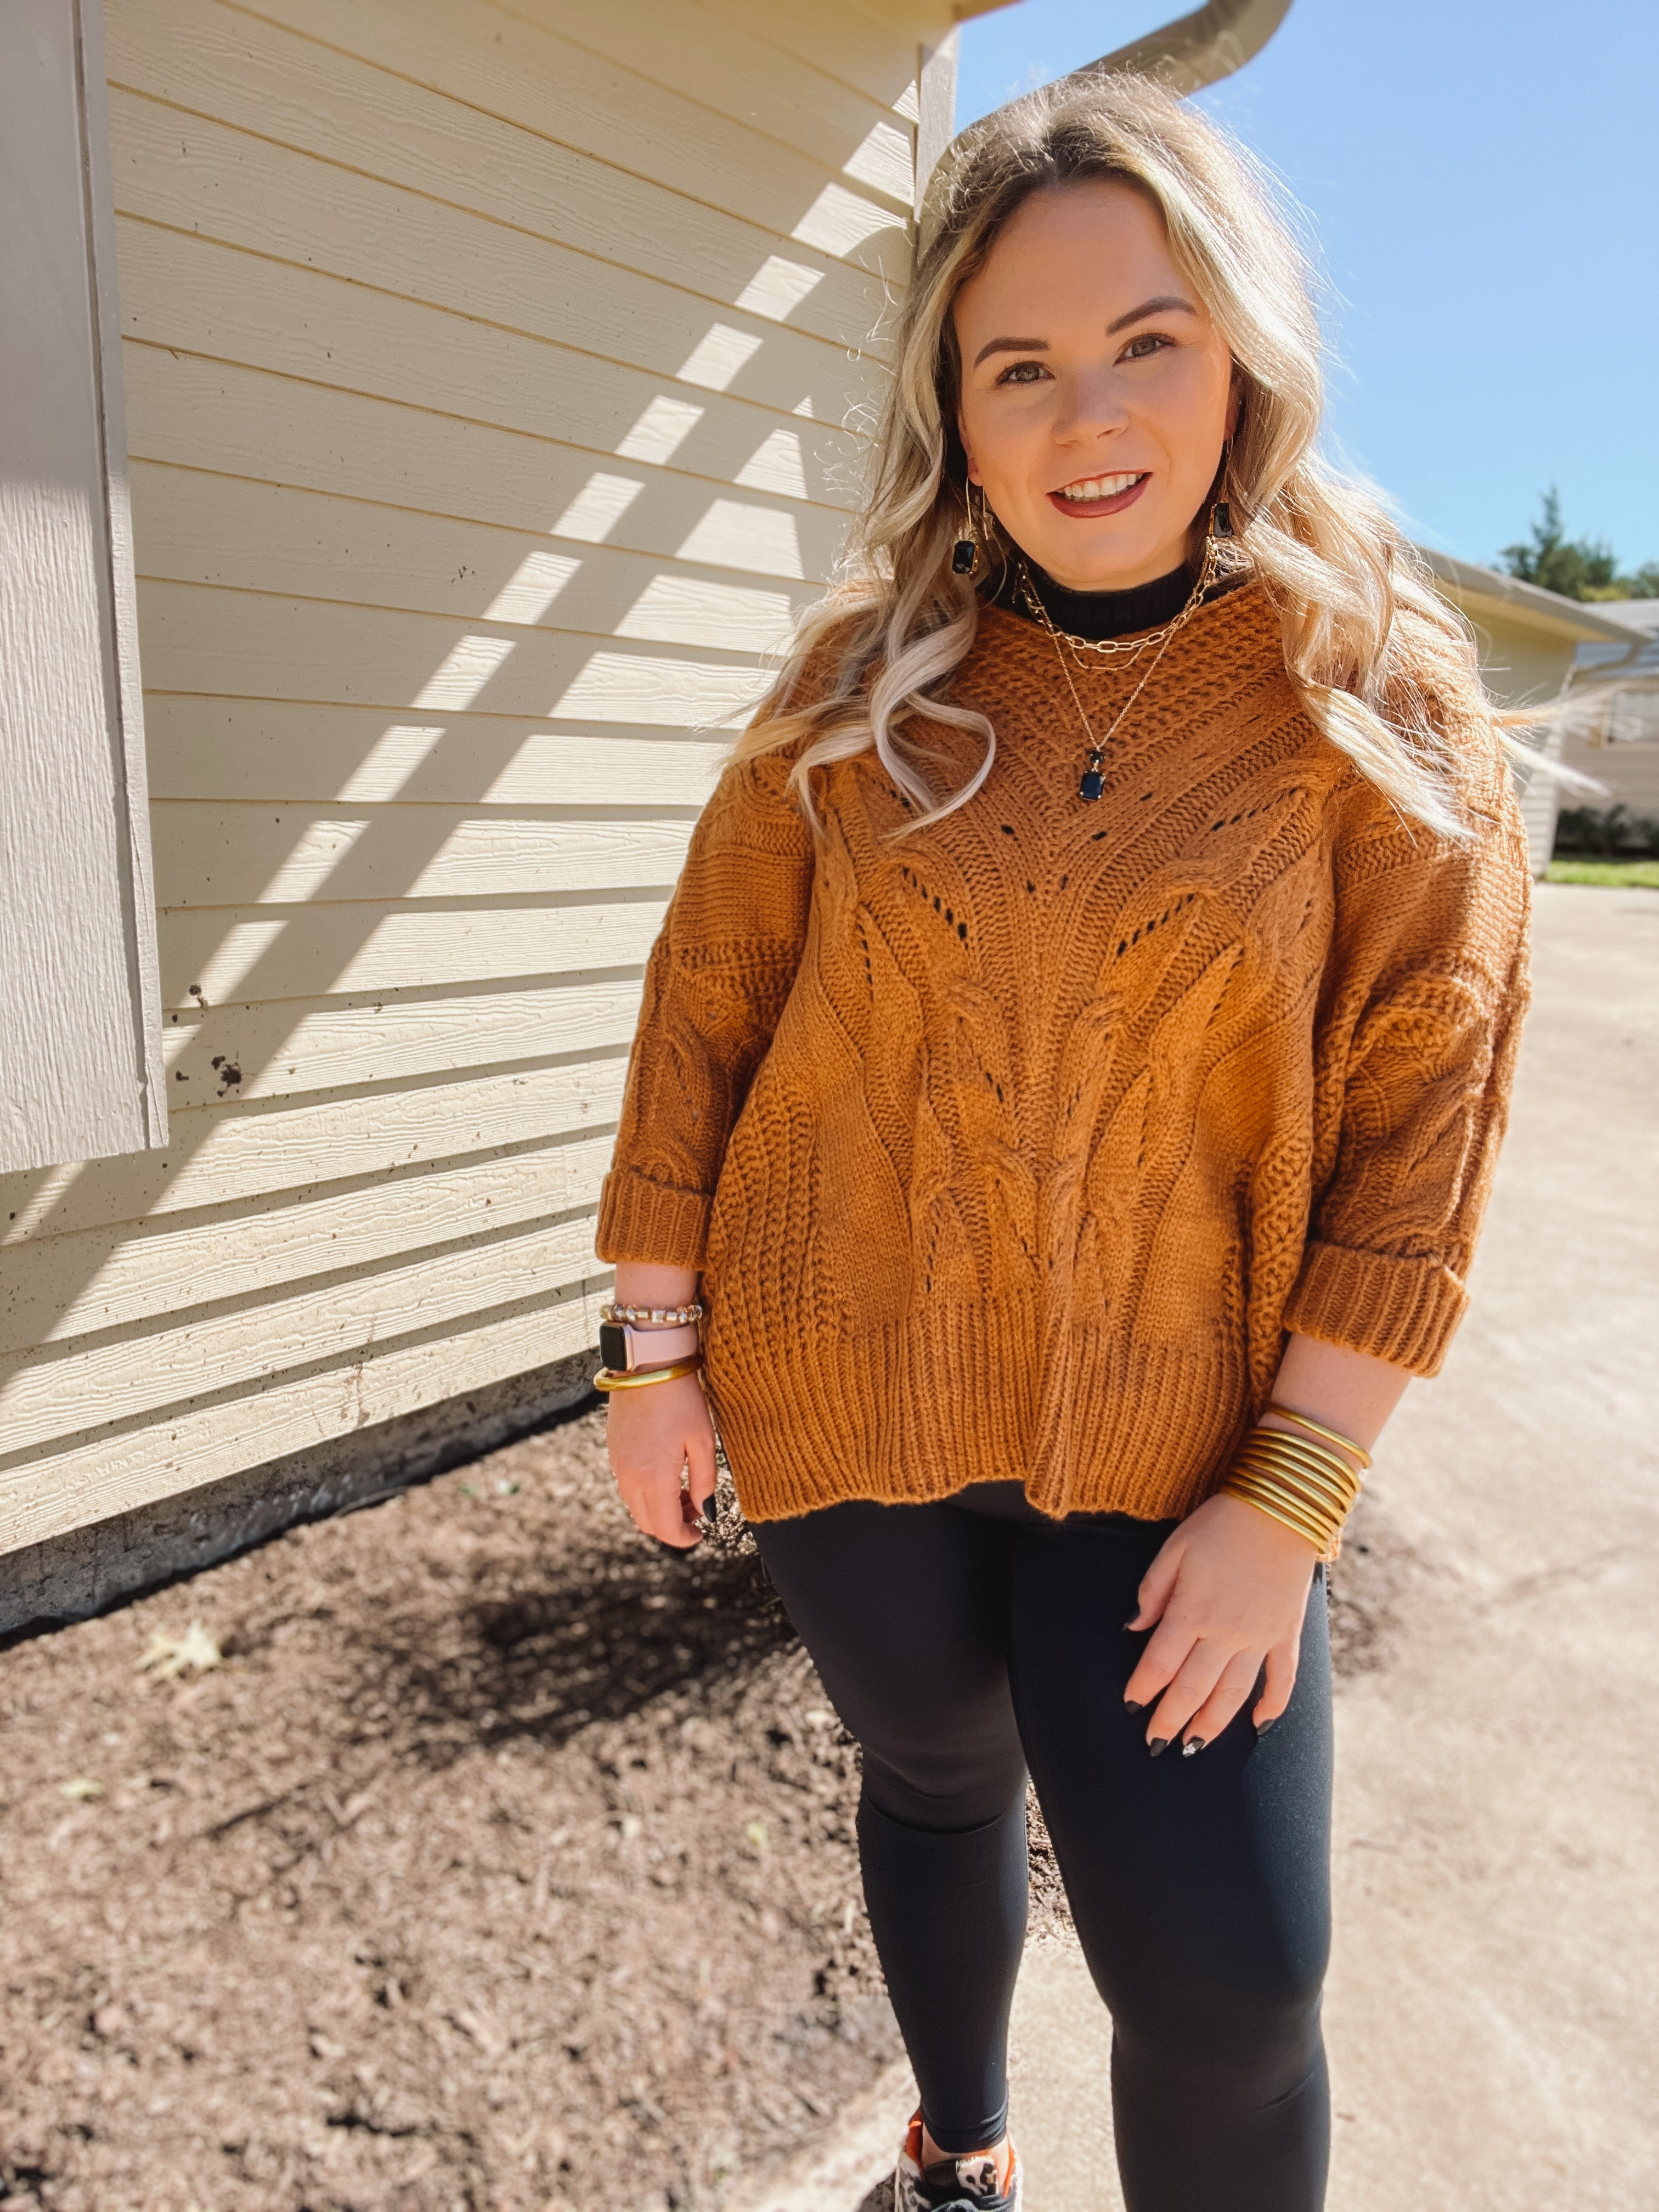 Crisp Morning Air Oversized Dolman 3/4 Sleeve Sweater in Camel Brown - Giddy Up Glamour Boutique